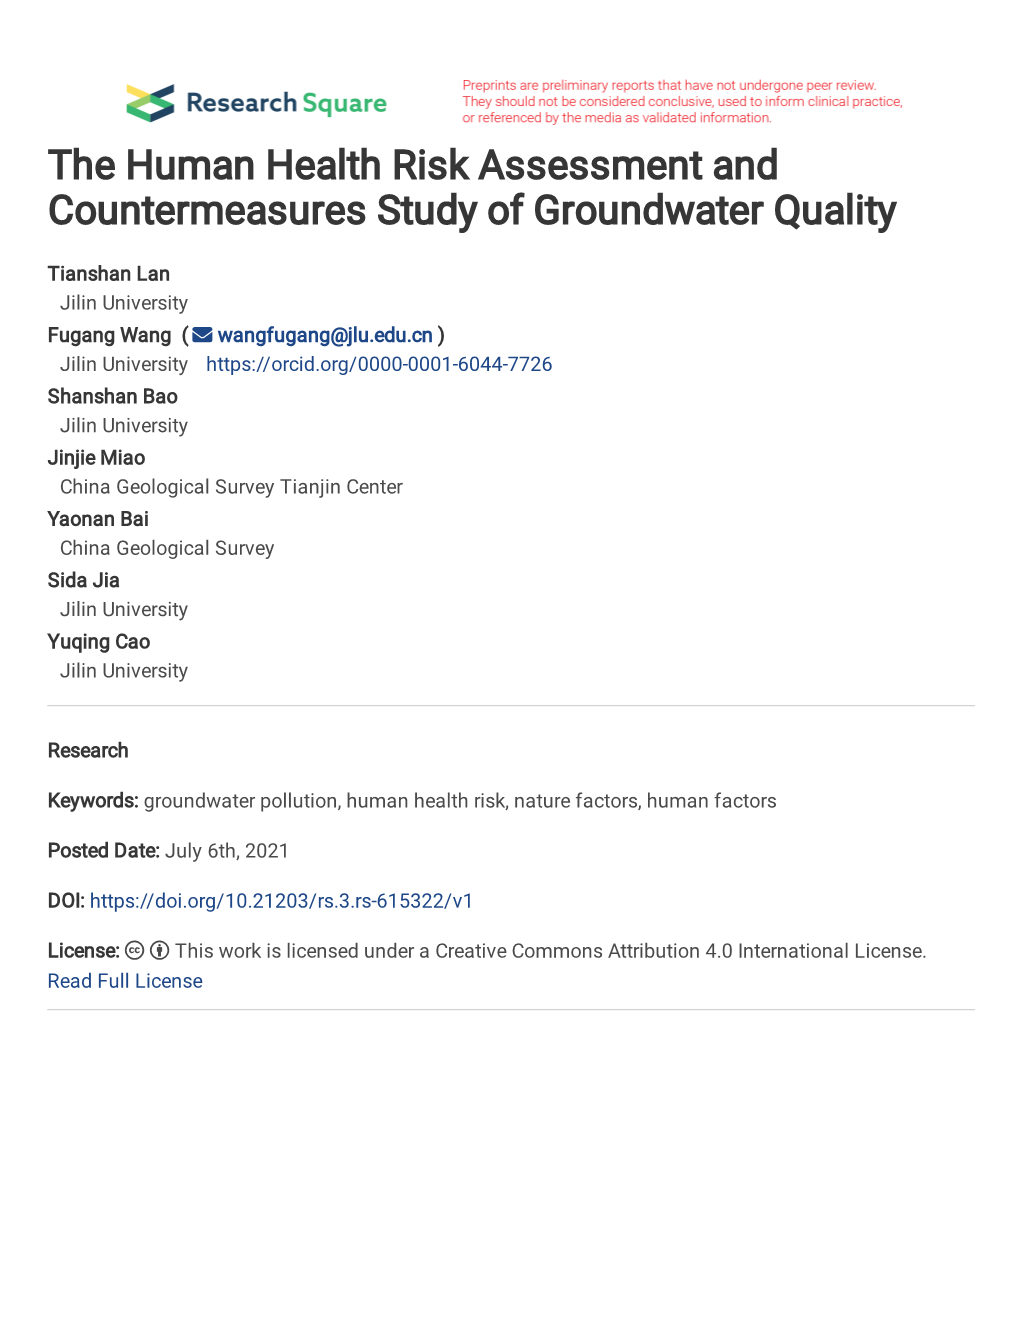 The Human Health Risk Assessment and Countermeasures Study of Groundwater Quality